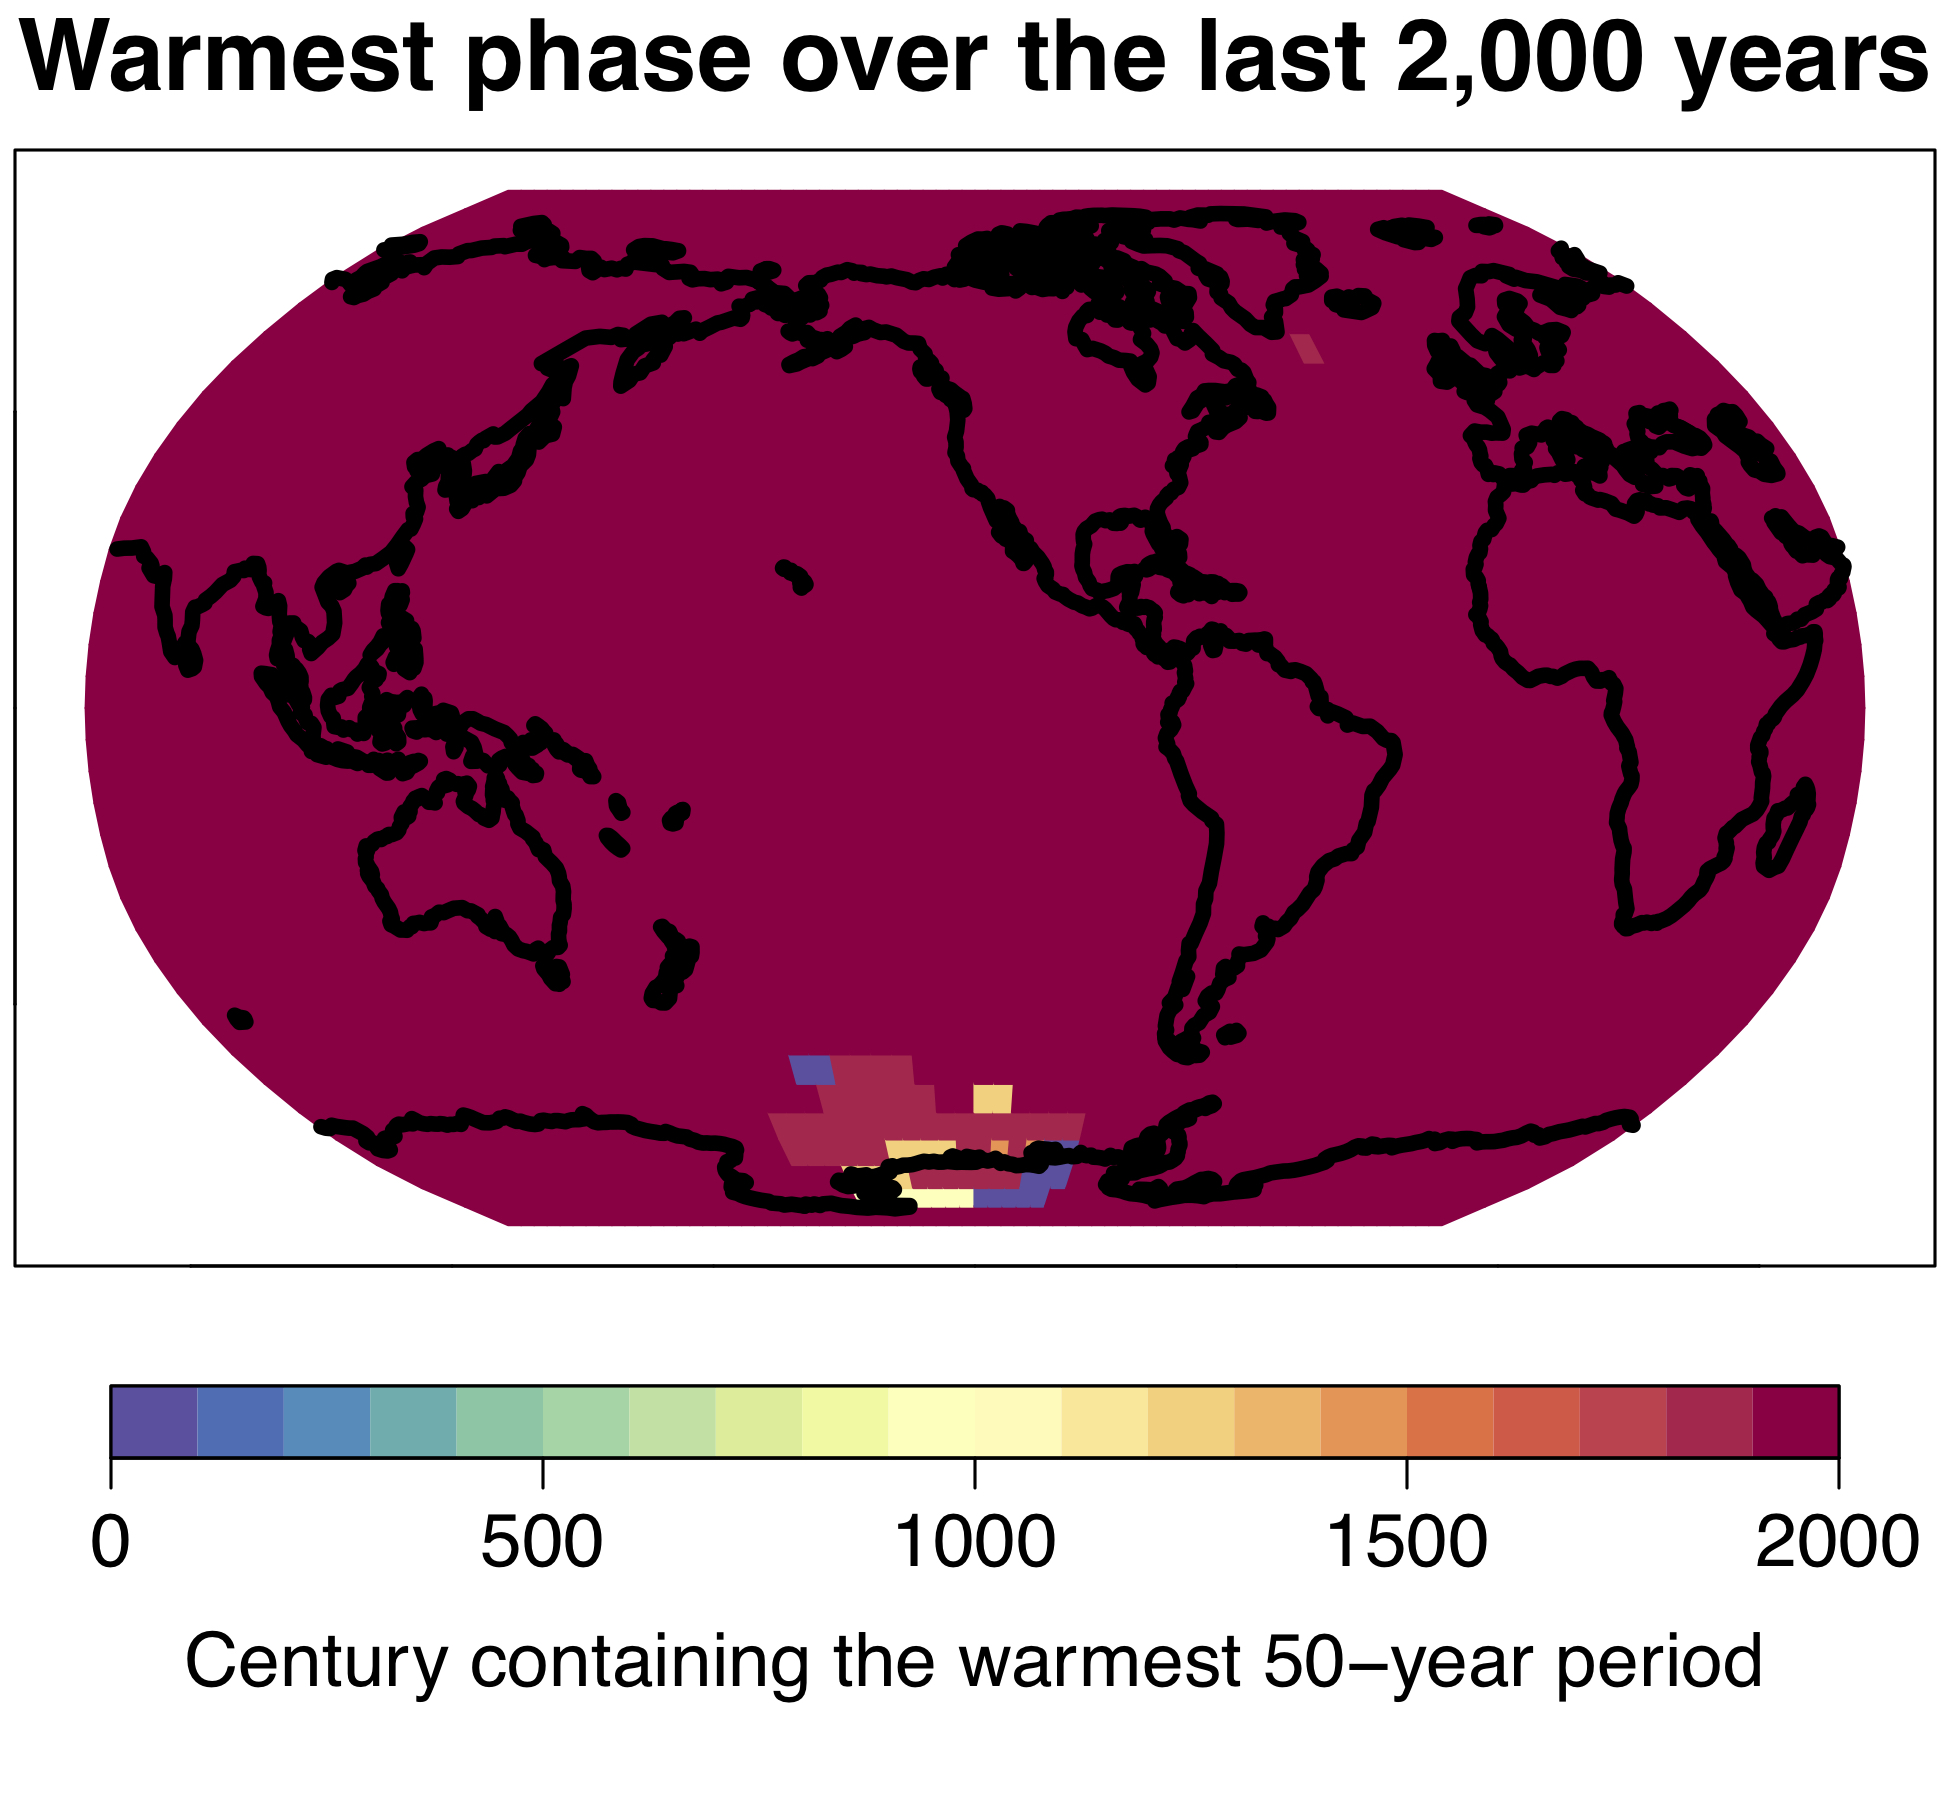 Modern global warming is a global phenomenon; the warmest 50-year period of the last 2000 years occurred on more than 98% of the earth’s surface in the 20th century.  © University of Bern